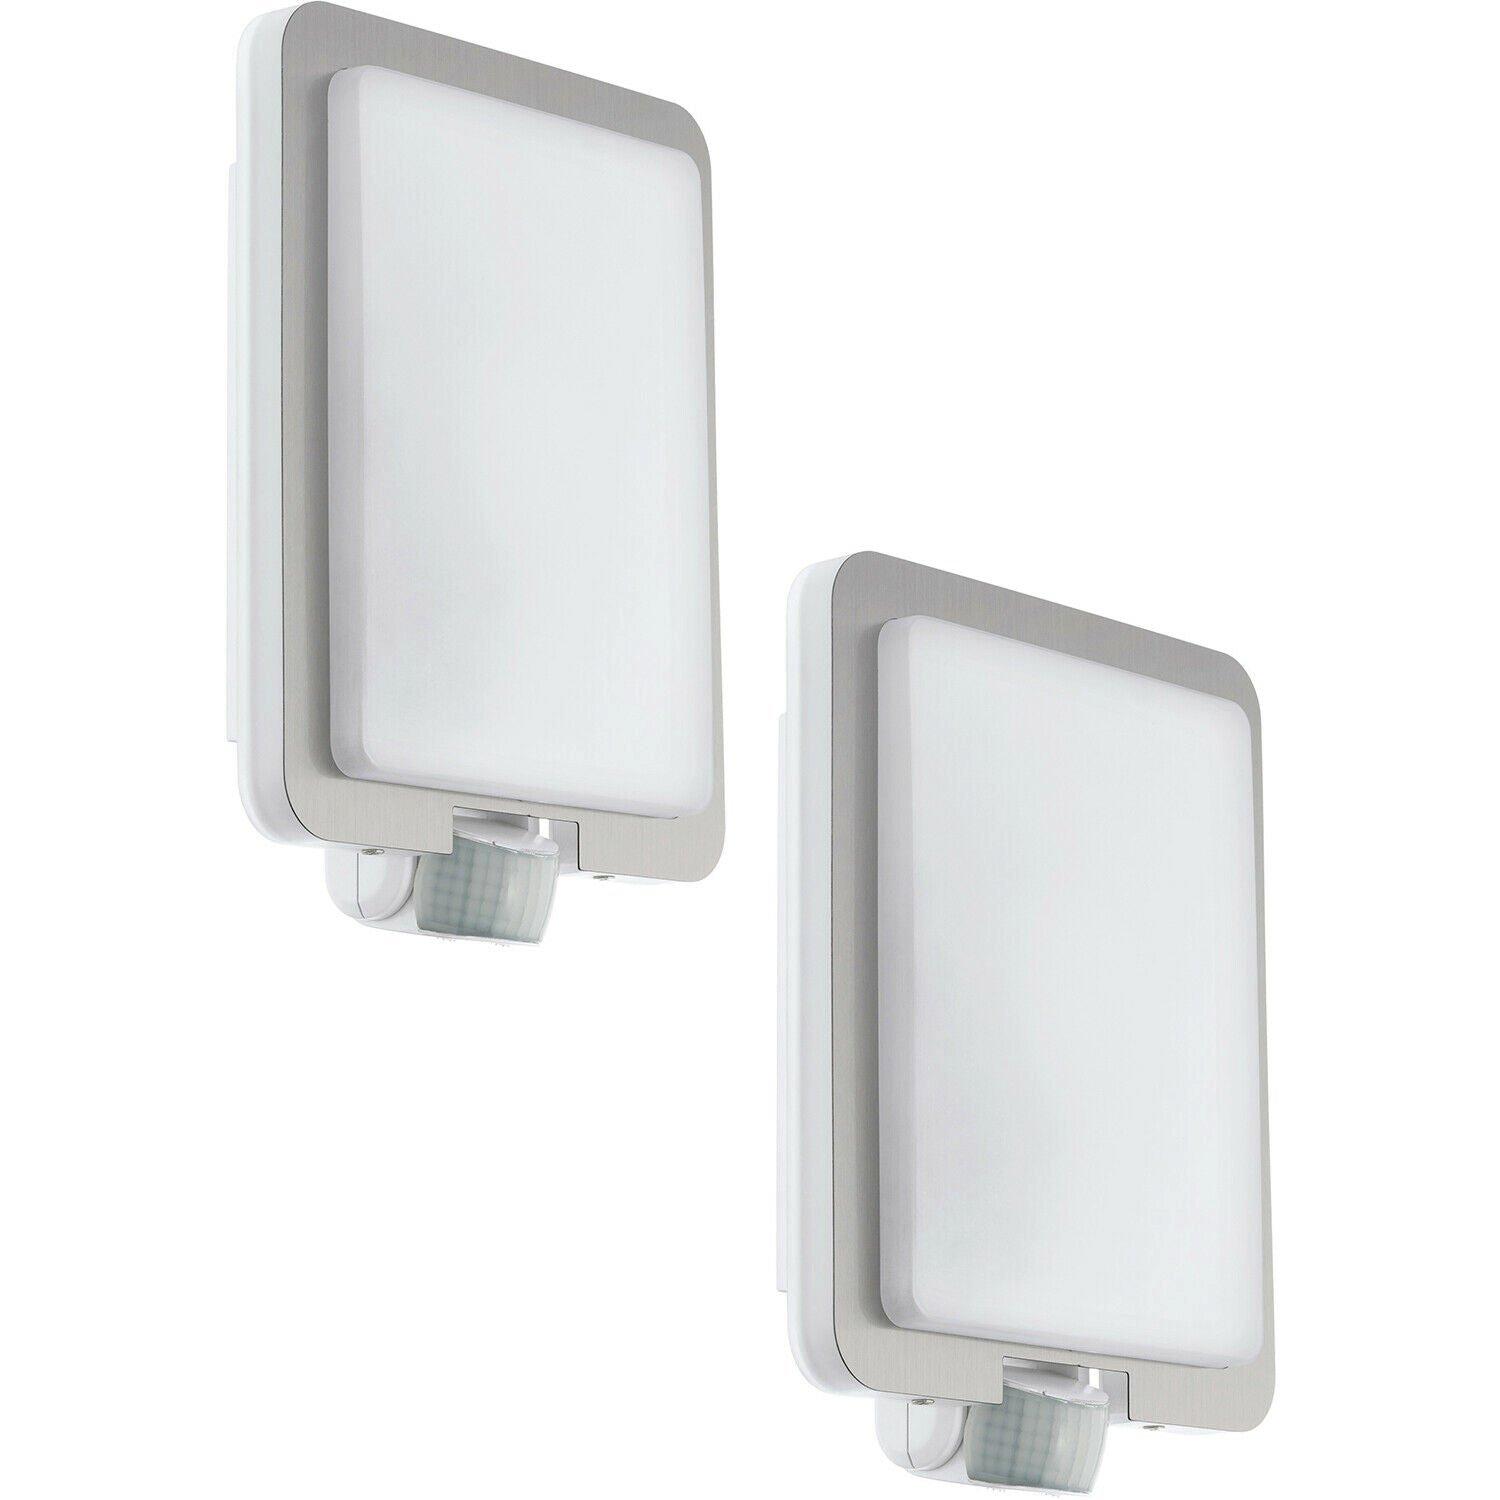 2 PACK IP44 Outdoor Wall Light & PIR Sensor Stainless Steel Square 28W E27